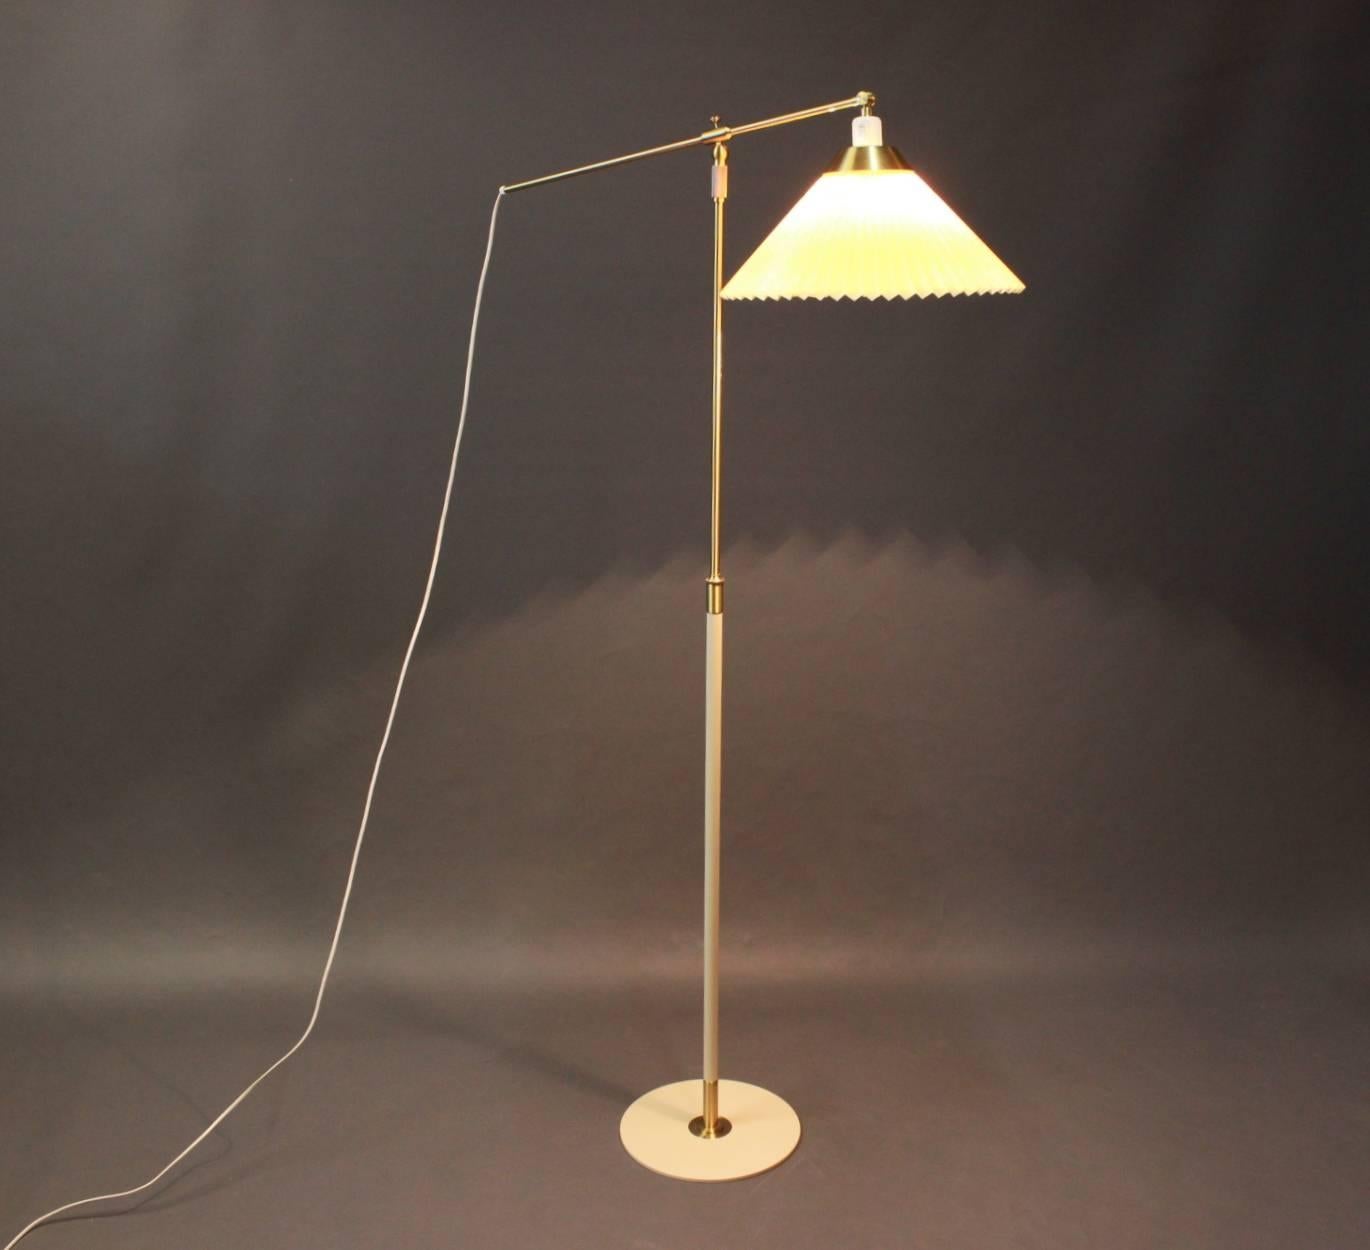 Le Llint floor lamp model 349 in brass, designed by Aage Petersen in 1946 and manufactured by Le Klint in the 1980s.